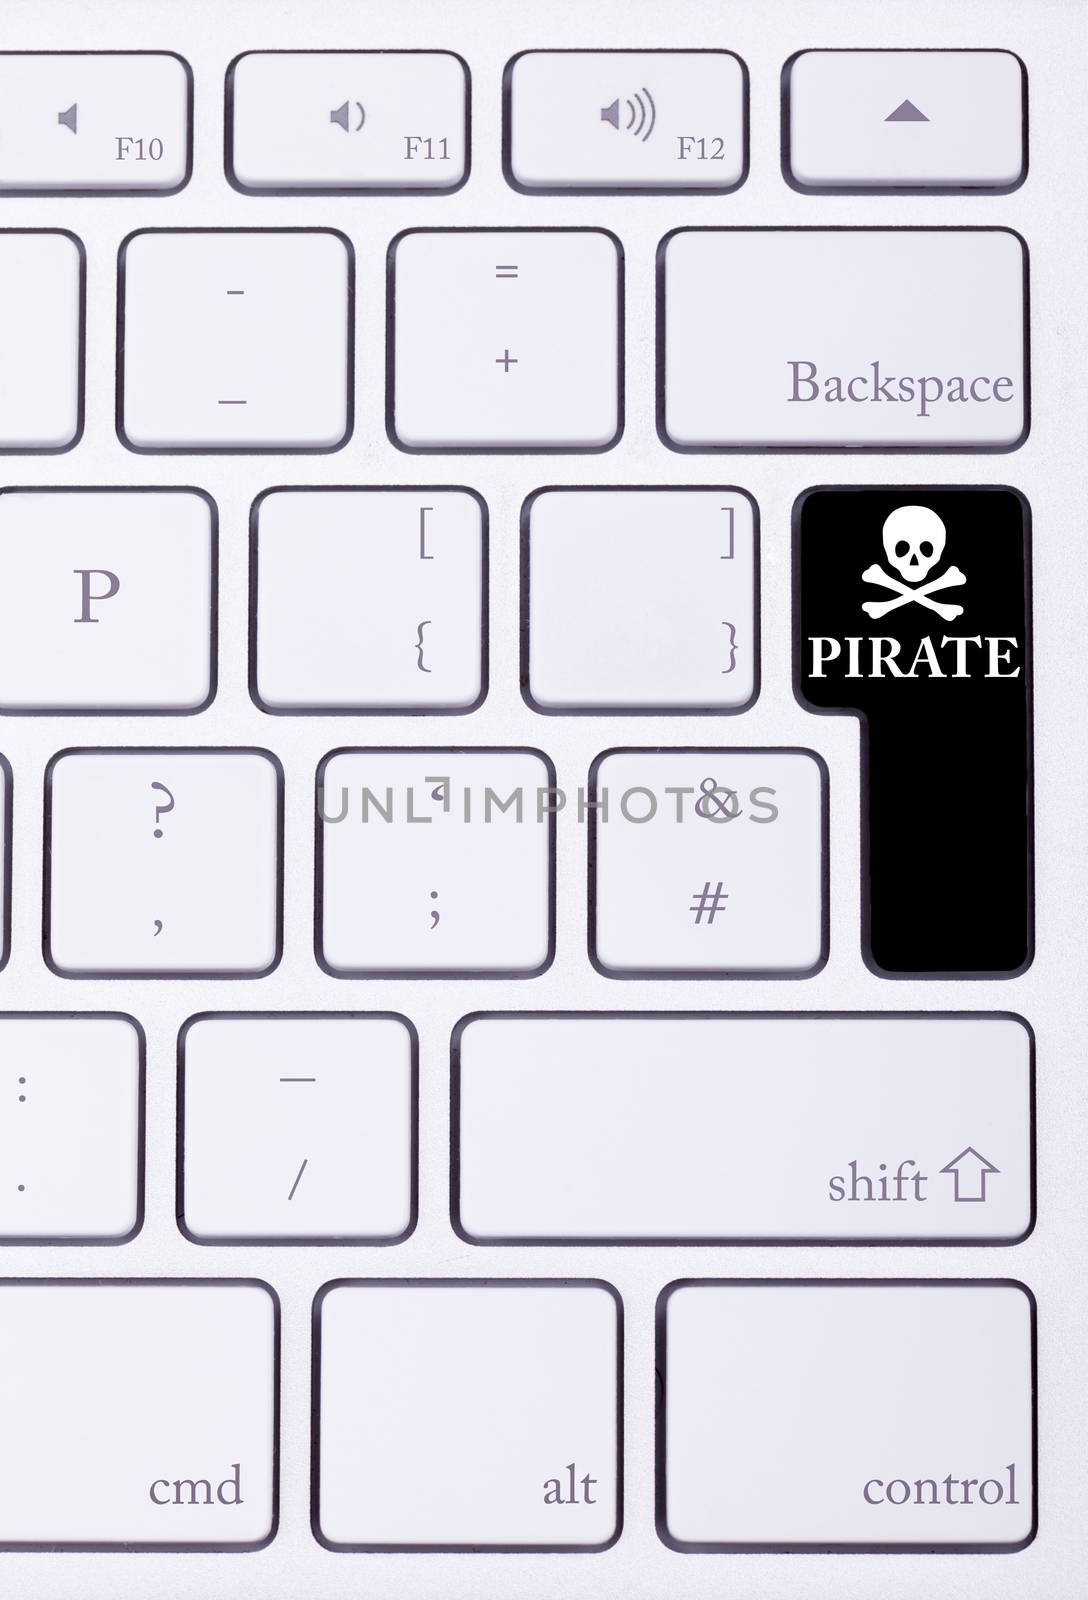 Keyboard with pirate word and symbol. Illegal download and torrent